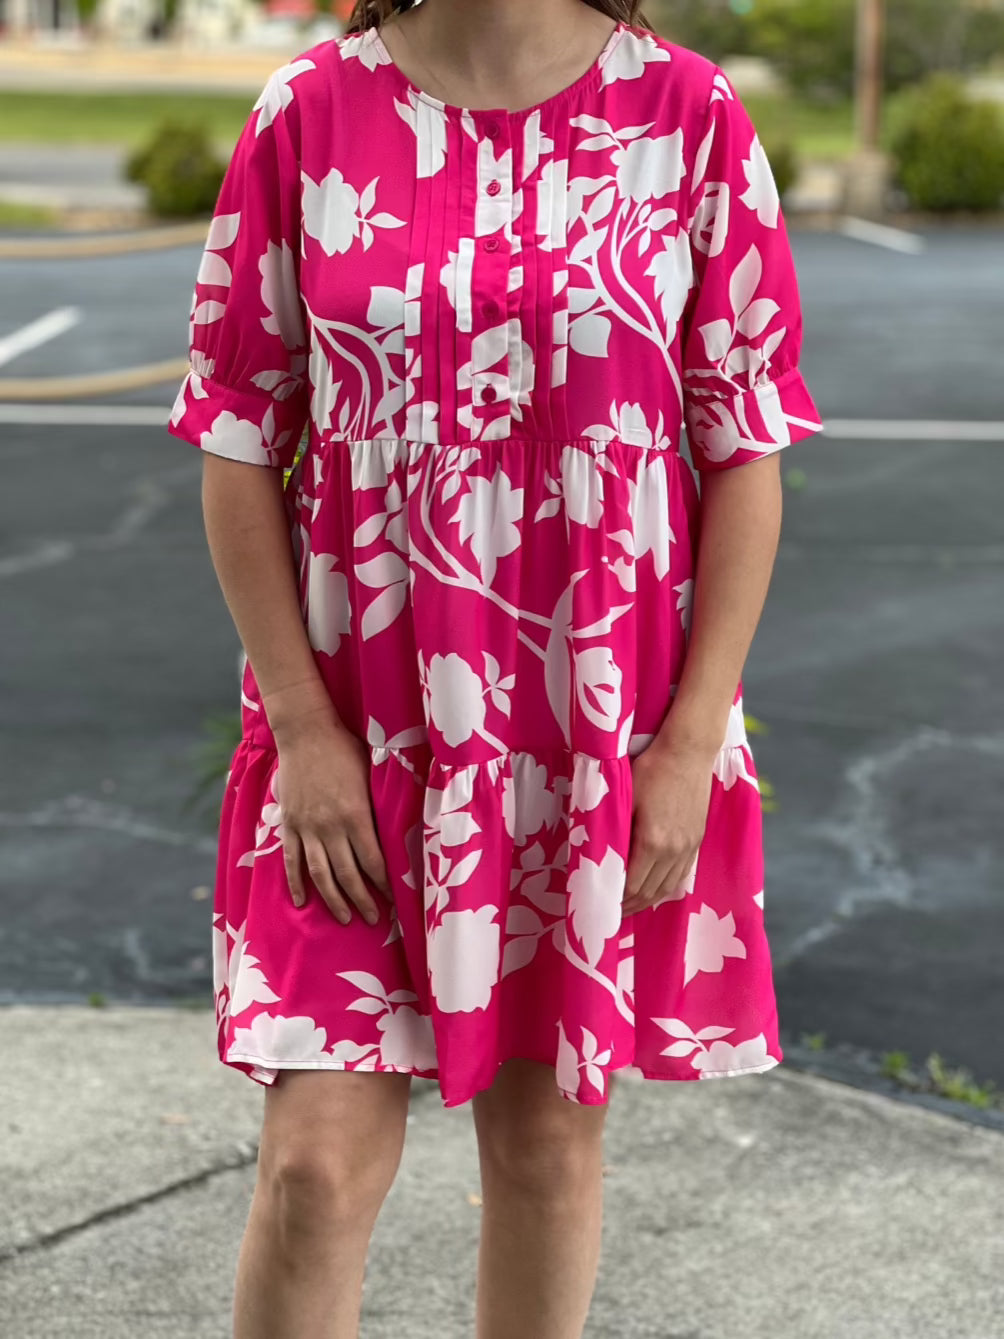 ss pink white floral Dress knee length